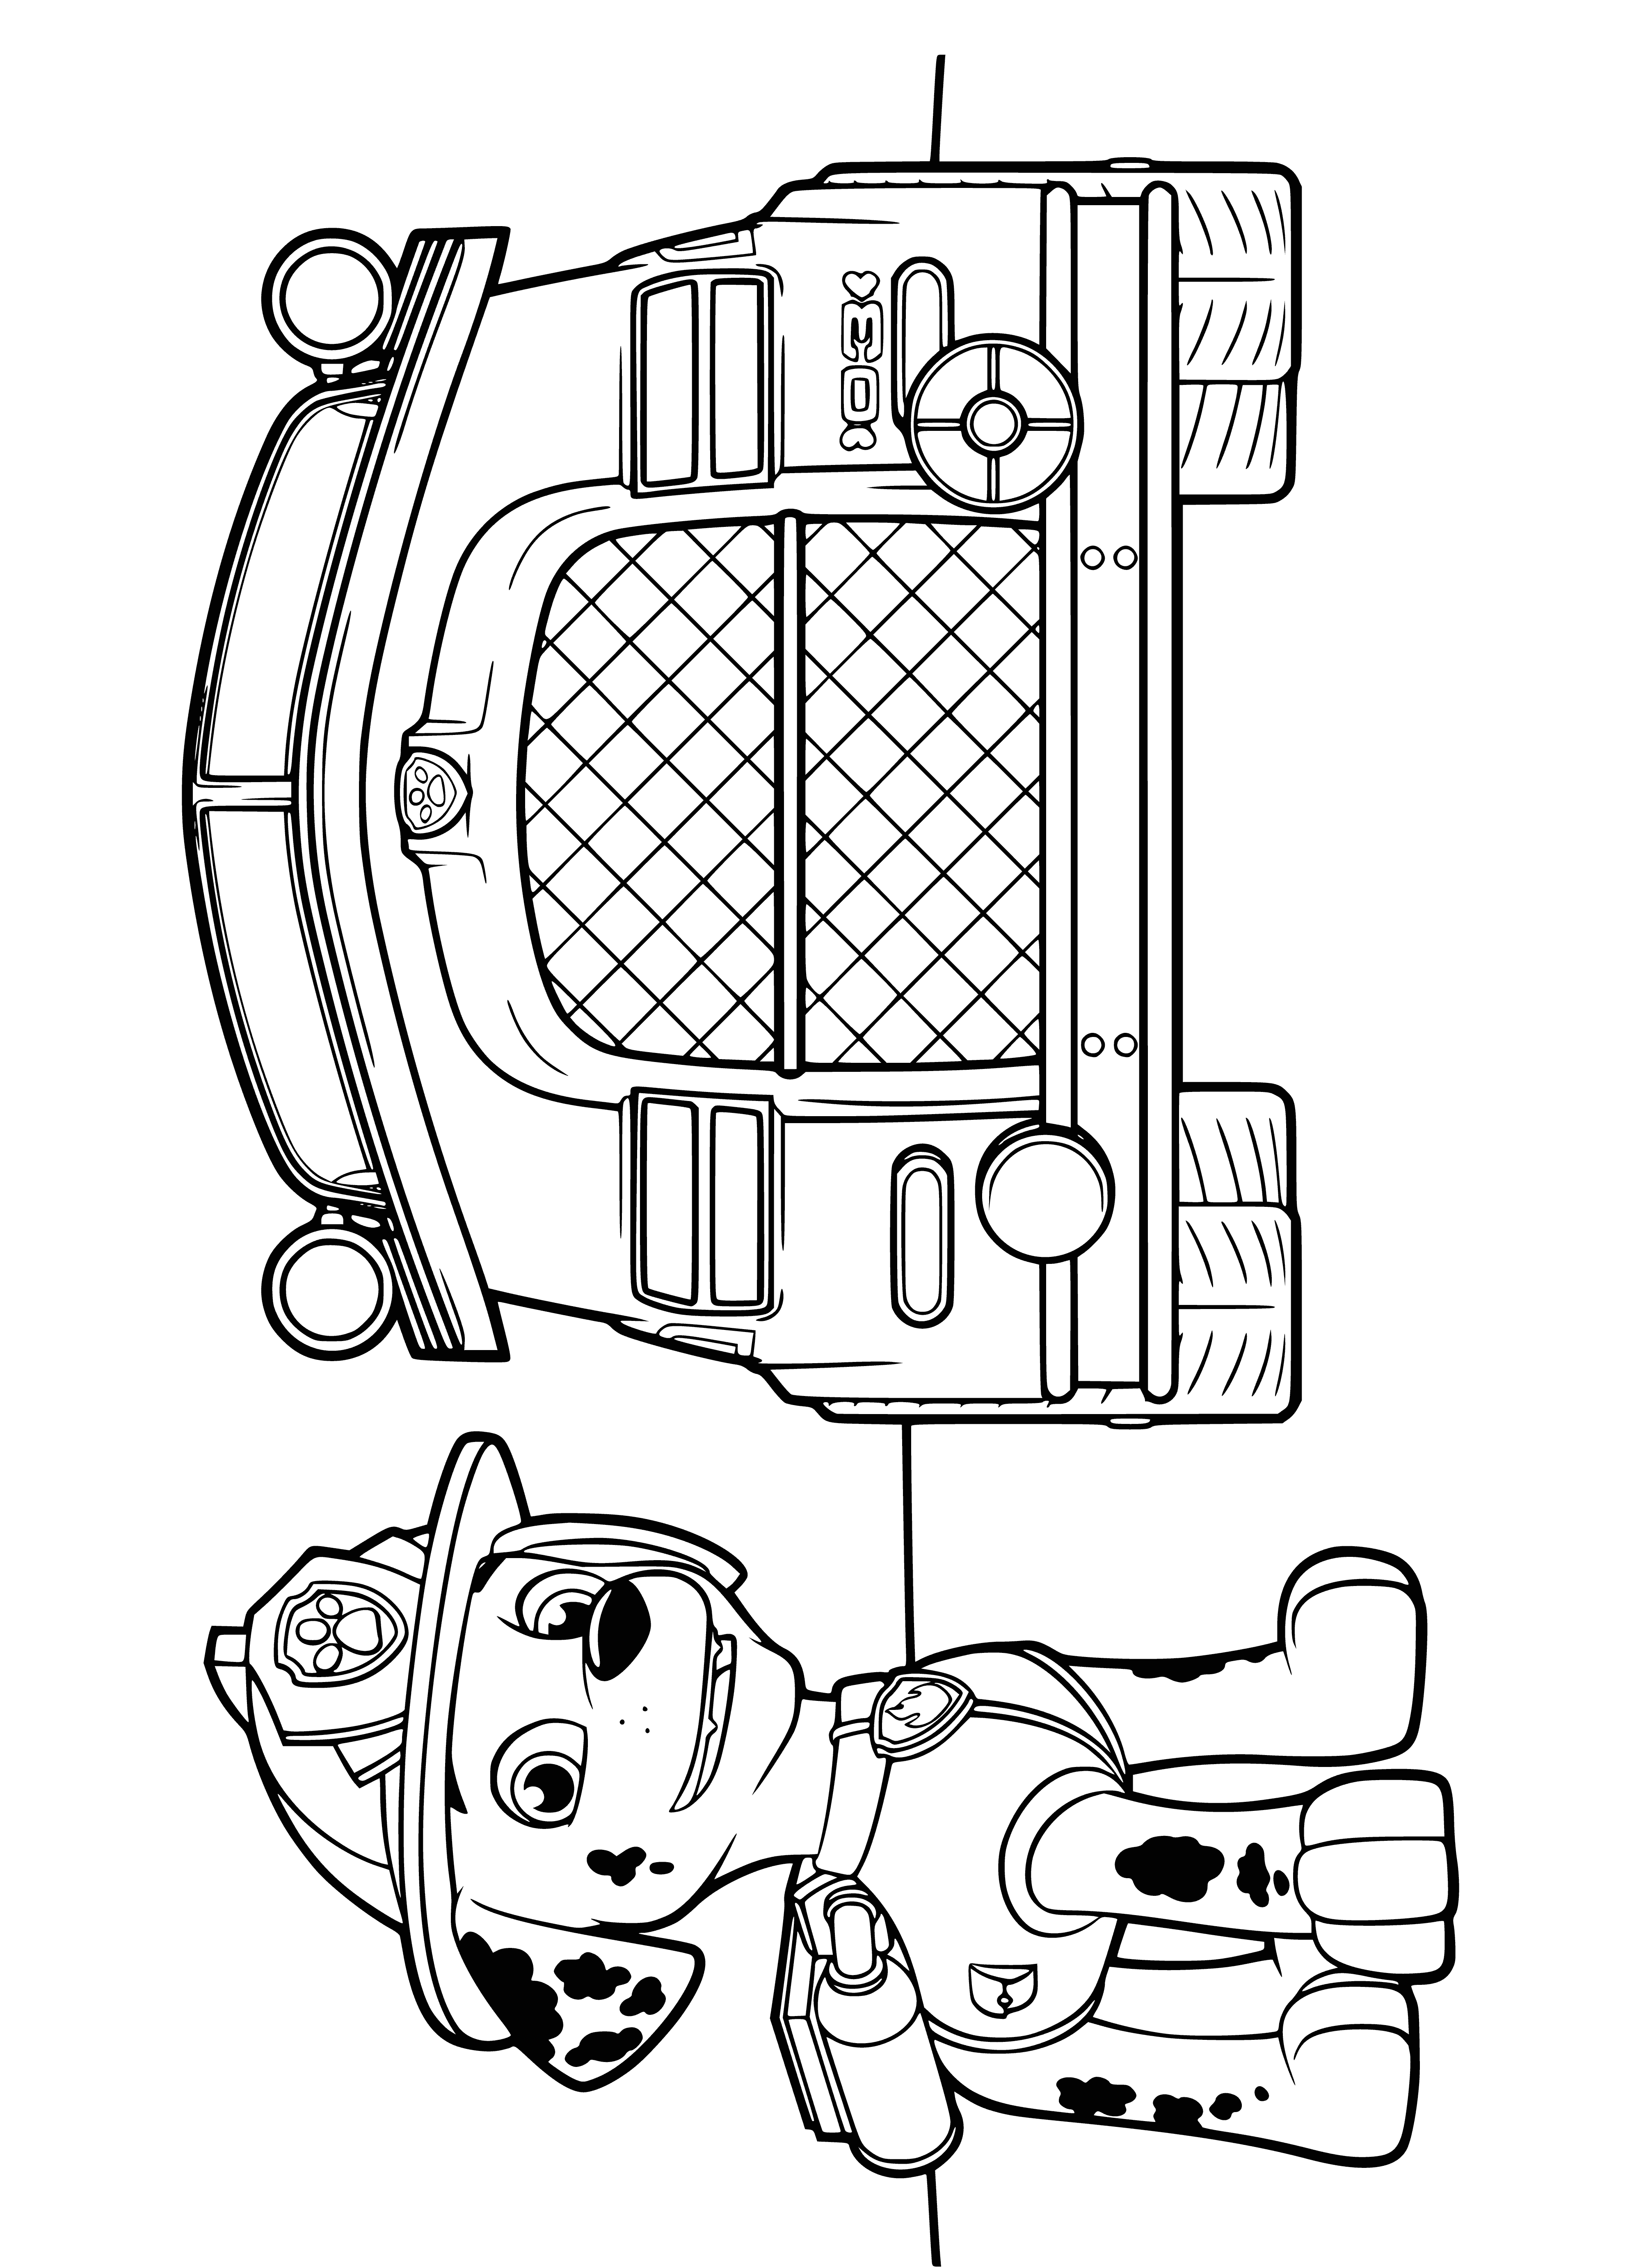 coloring page: PAW Patrol: Marshal & fire truck onscene of fire. Fire truck sprays water, Marshal ready to help.